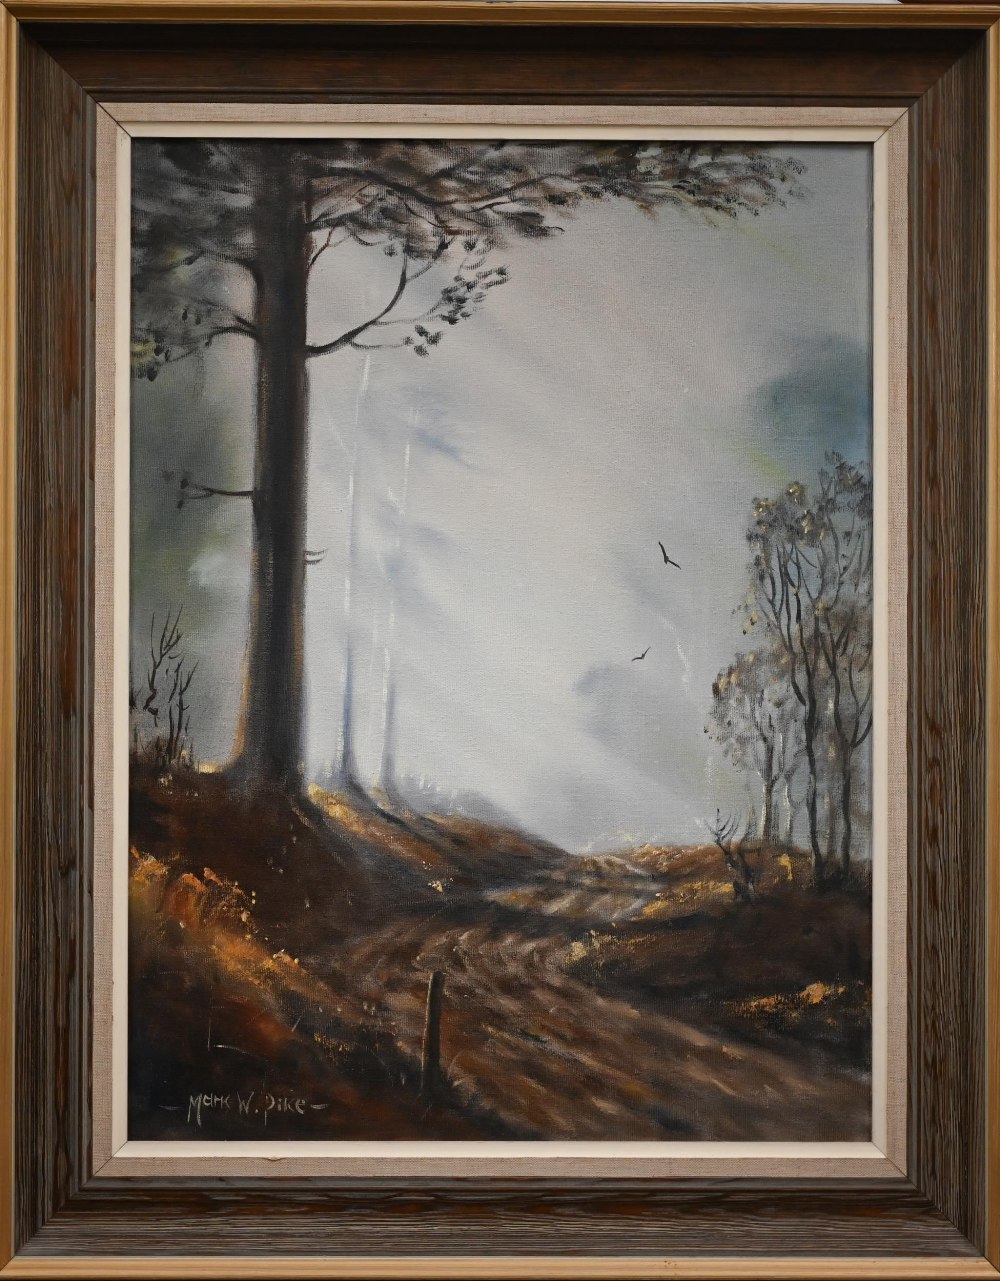 Three pictures - Mark W Pike - Tall tree, oil on canvas, signed lower left, 59 x 44 cm; B D Horswell - Image 3 of 12